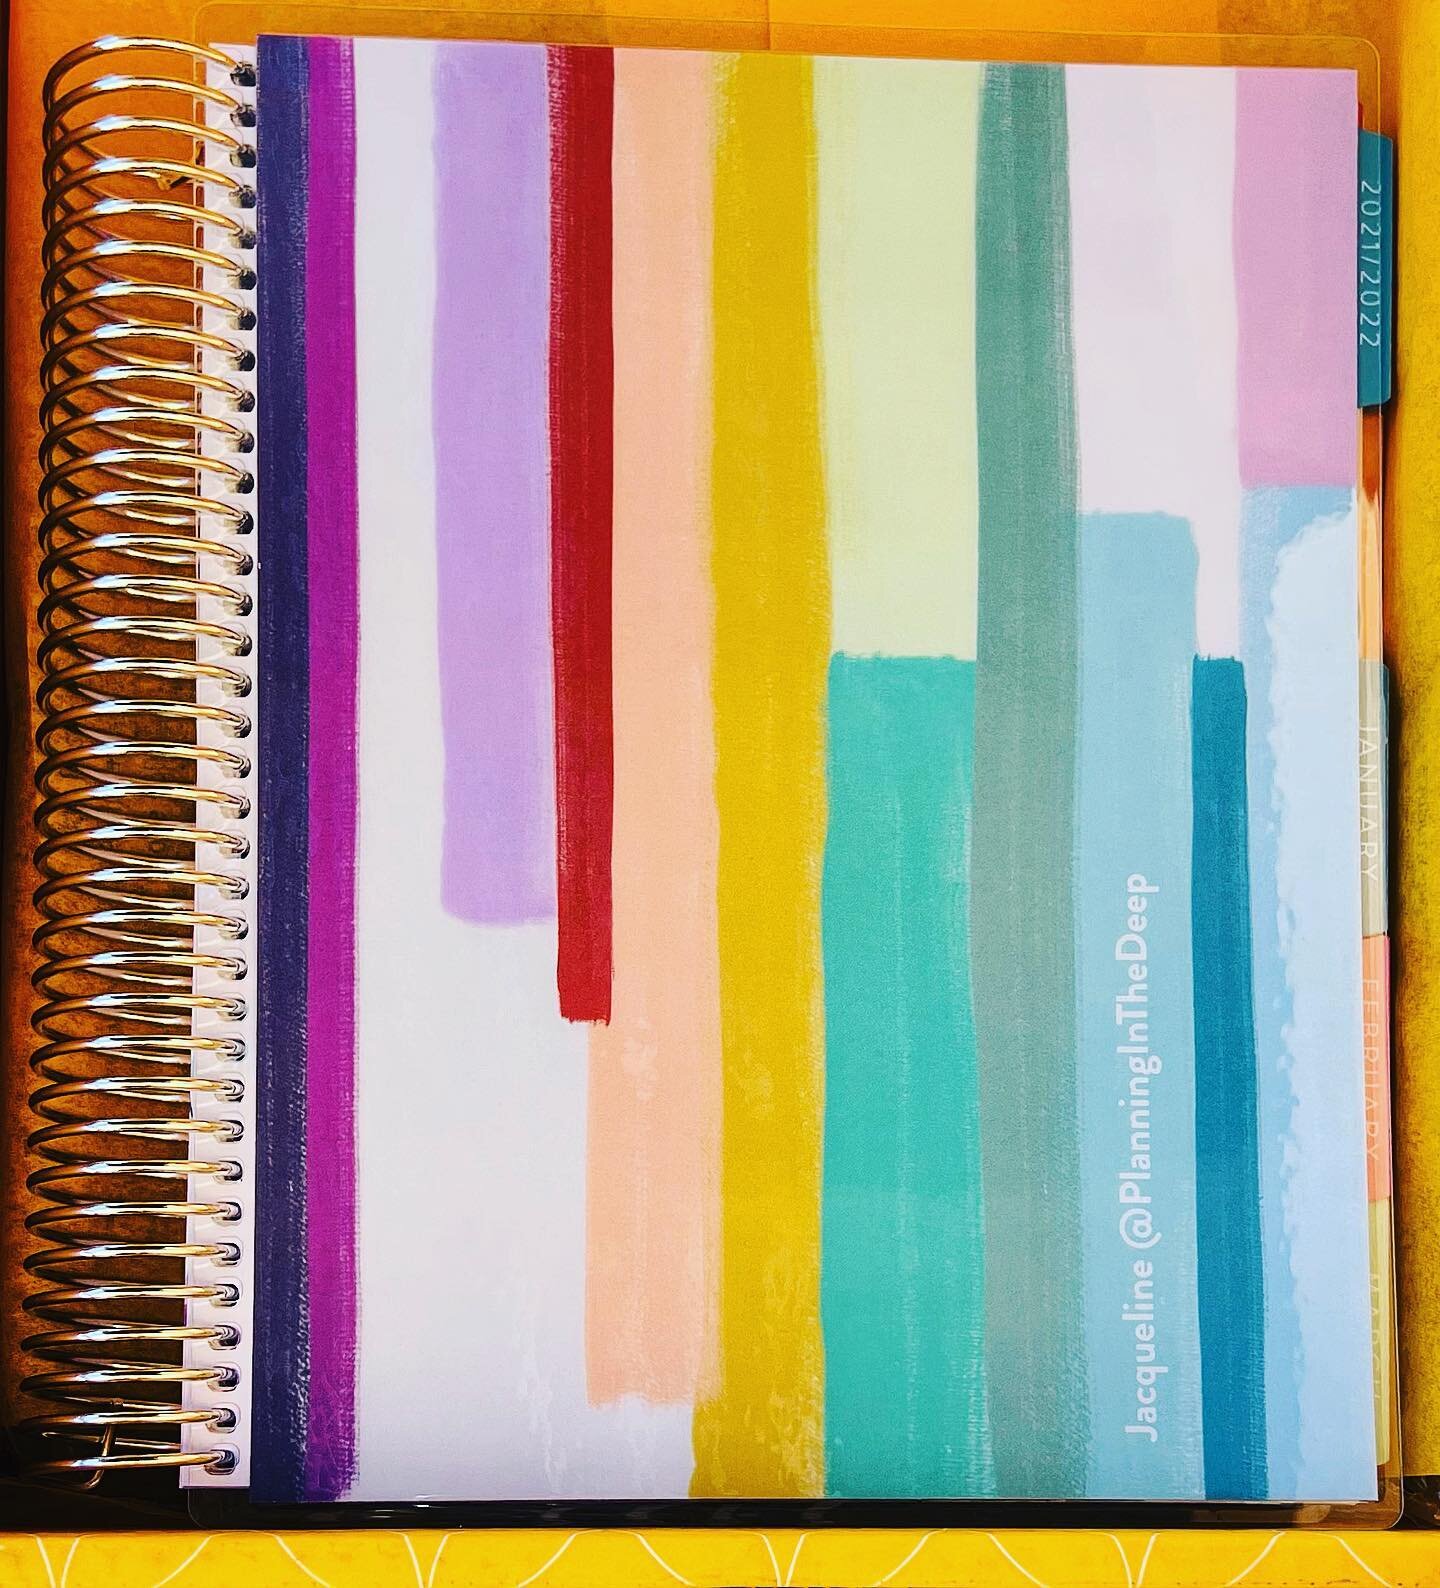 My New Erin Condren Monthly Planner Arrived. Can&rsquo;t Wait To Do A Walk Through On My YouTube Channel. 
&bull;
&bull;
&bull;
@erincondren #erincondren #eclifeplanner #eclp #erincondrenmonthlydeluxeplanner #monthlyplanner #creative #creativity #col